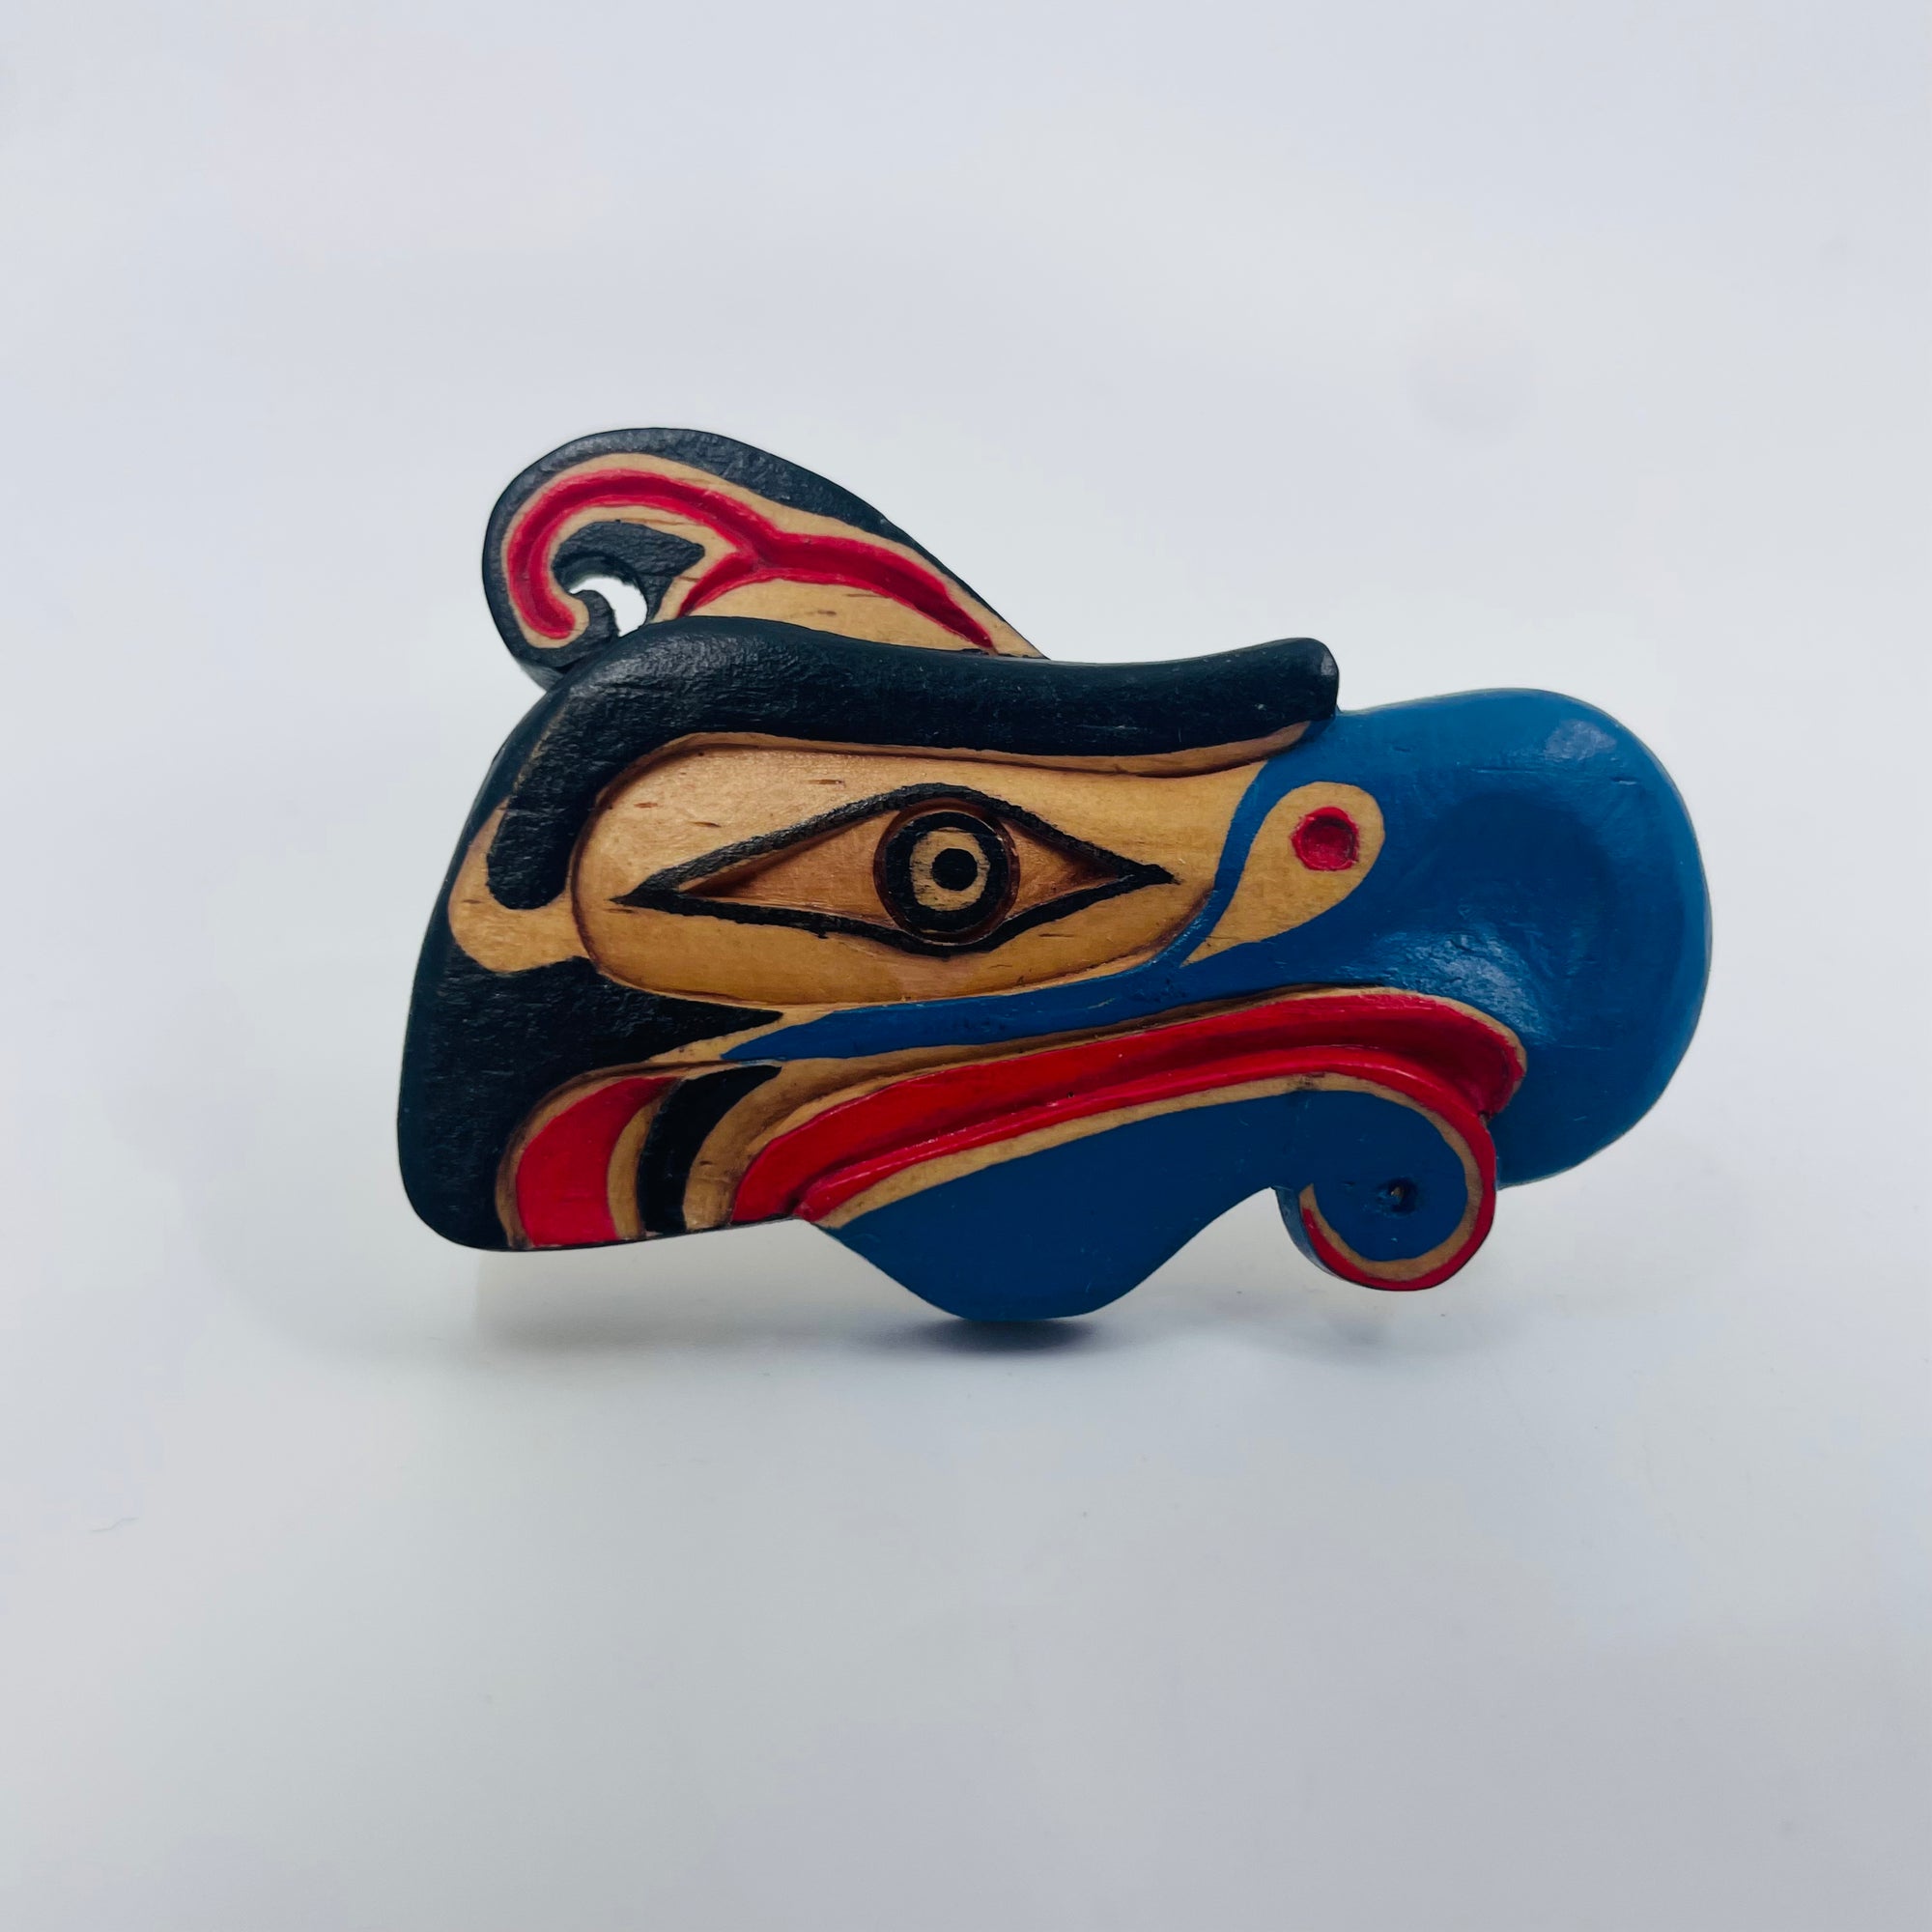 Artie George Magnets - Thunderbird - WM-Magnets-8 - House of Himwitsa Native Art Gallery and Gifts